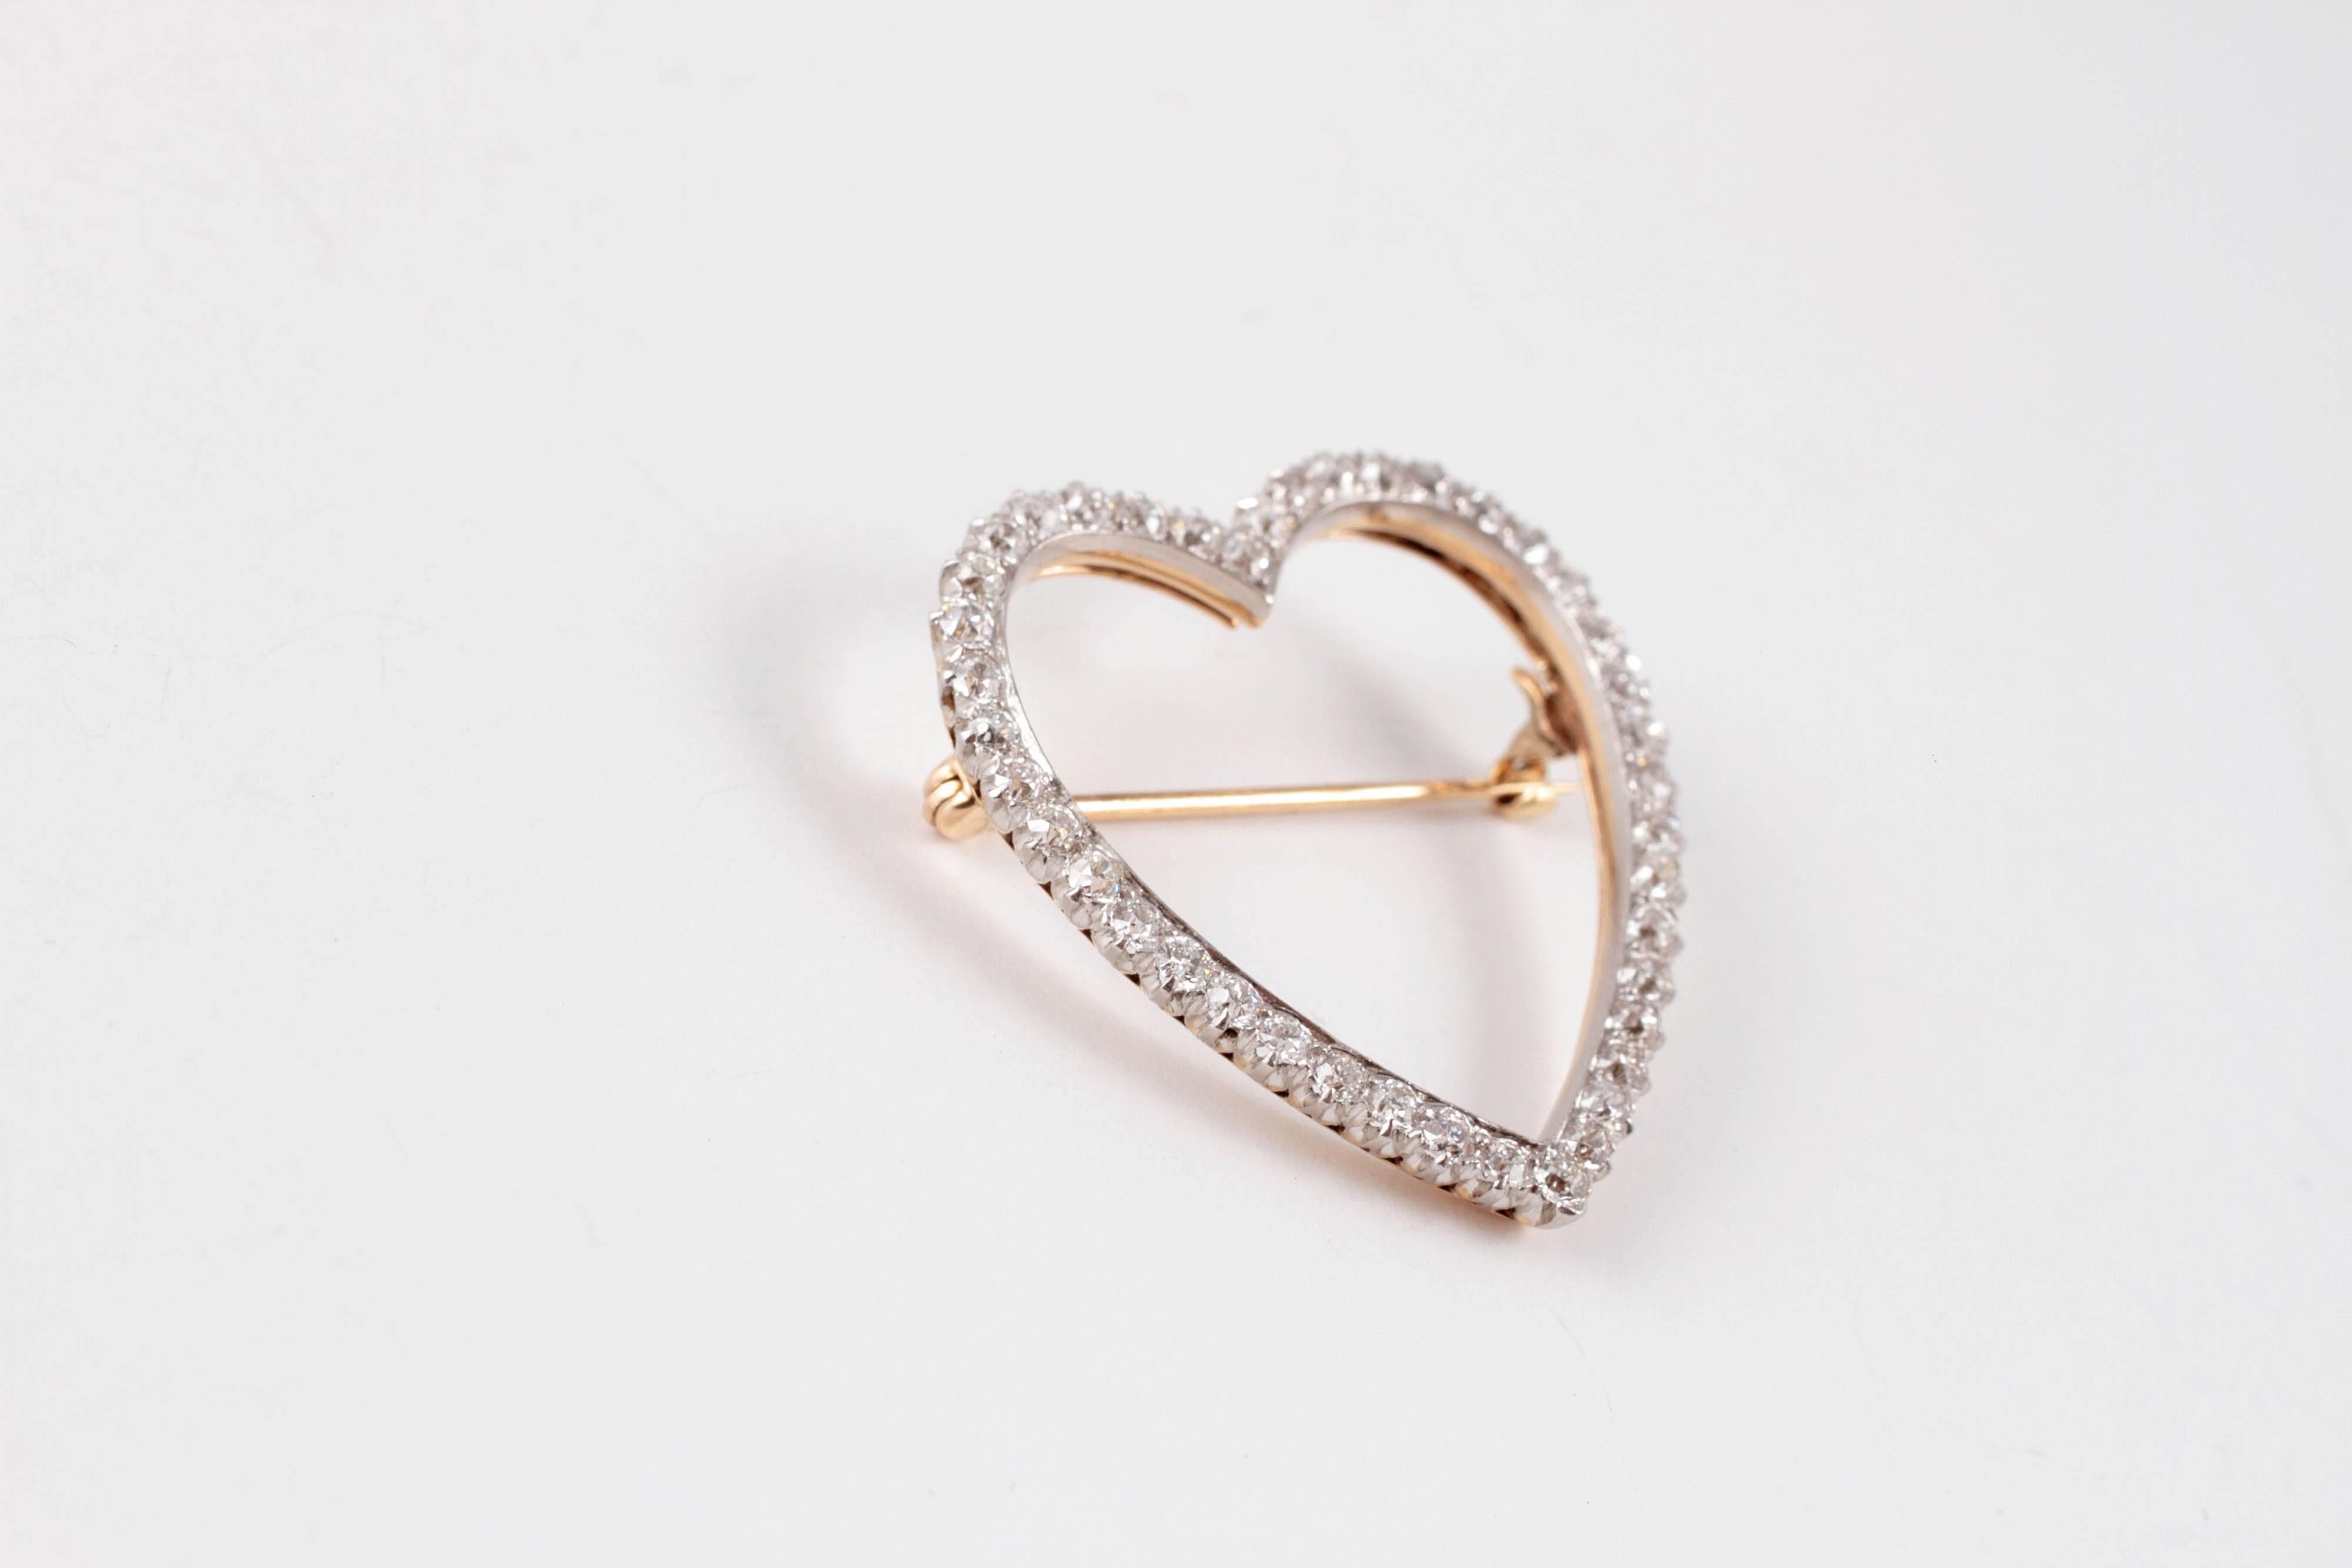 This light and lovely brooch would look beautiful on a blouse, scarf or in your hair!  Composed of 18 karat yellow and white gold in a heart shape, supporting 1.70 carats of diamonds.